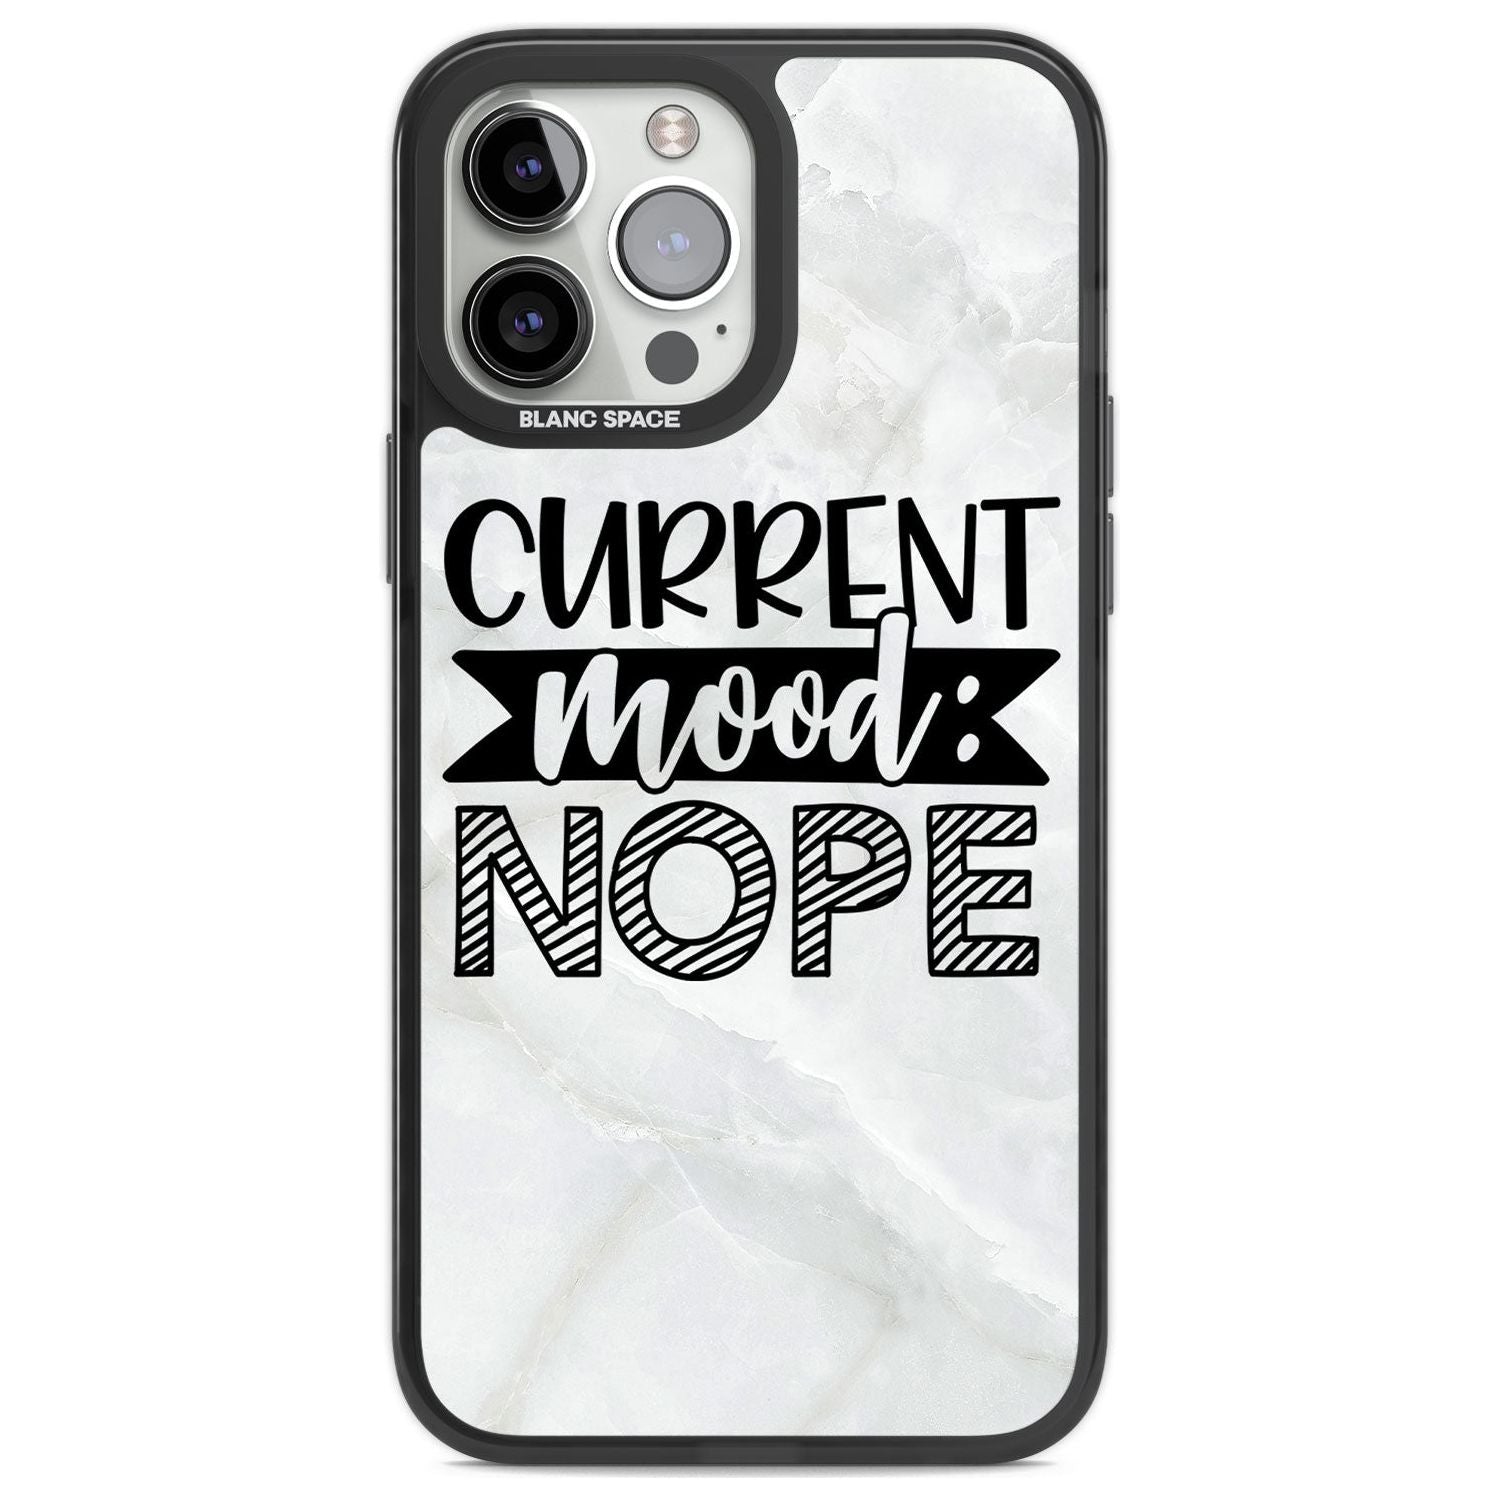 Current Mood NOPE Phone Case iPhone 14 Pro Max / Black Impact Case,iPhone 13 Pro Max / Black Impact Case Blanc Space